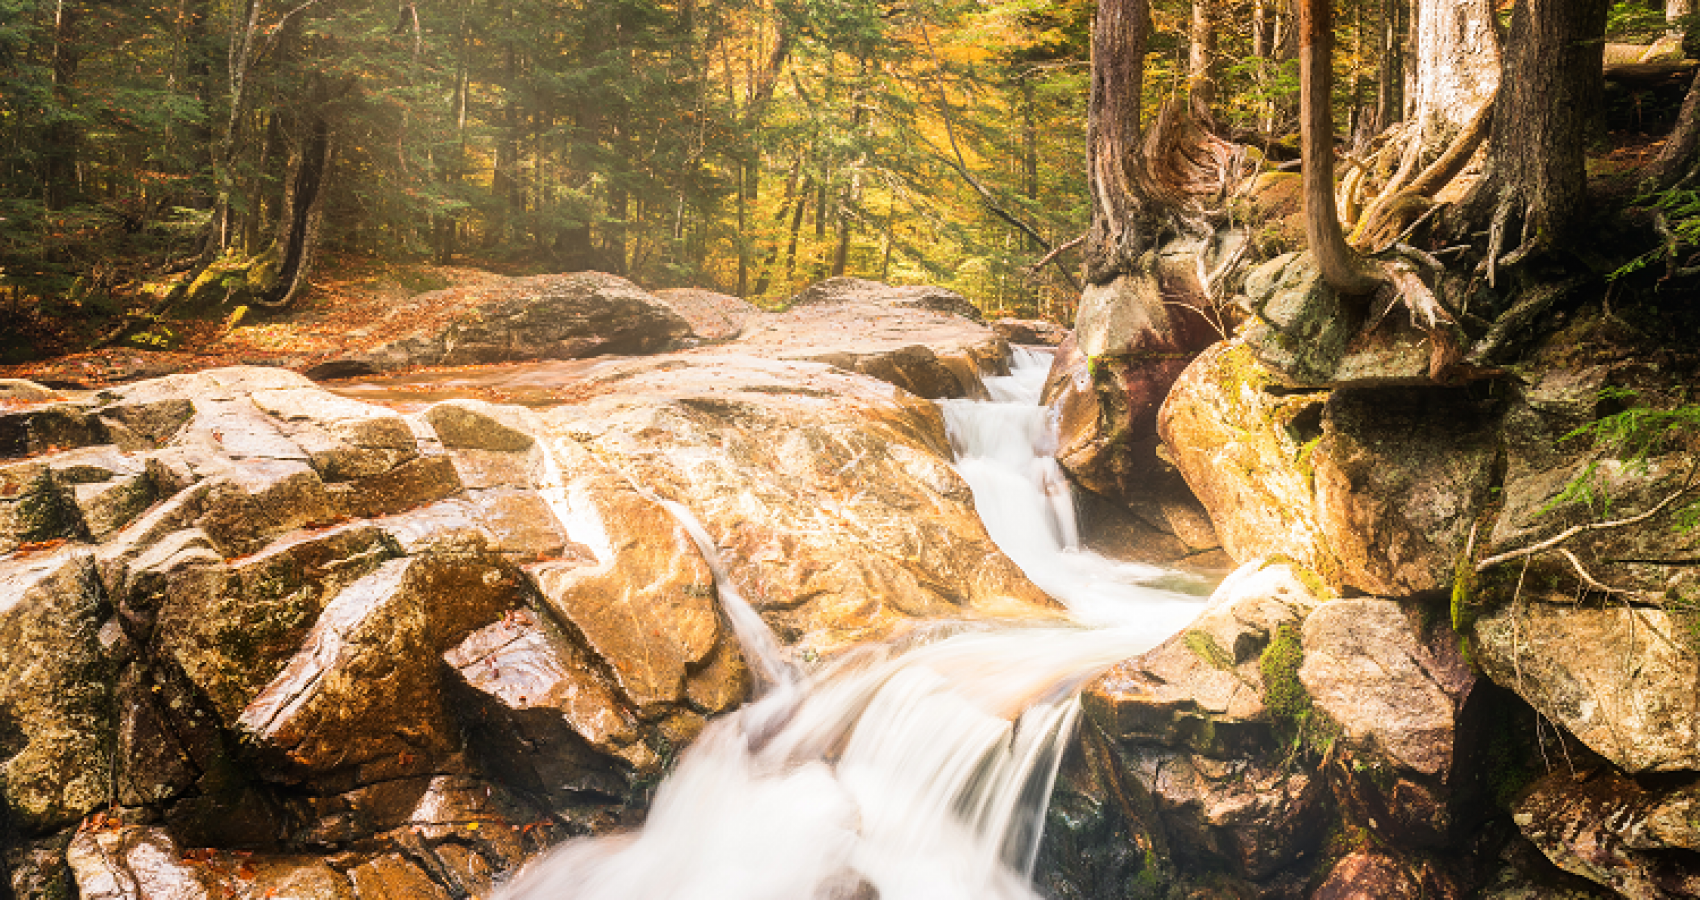 Hiking these waterfall trails in NH's White Mountains brings stunning scenery like this to life.